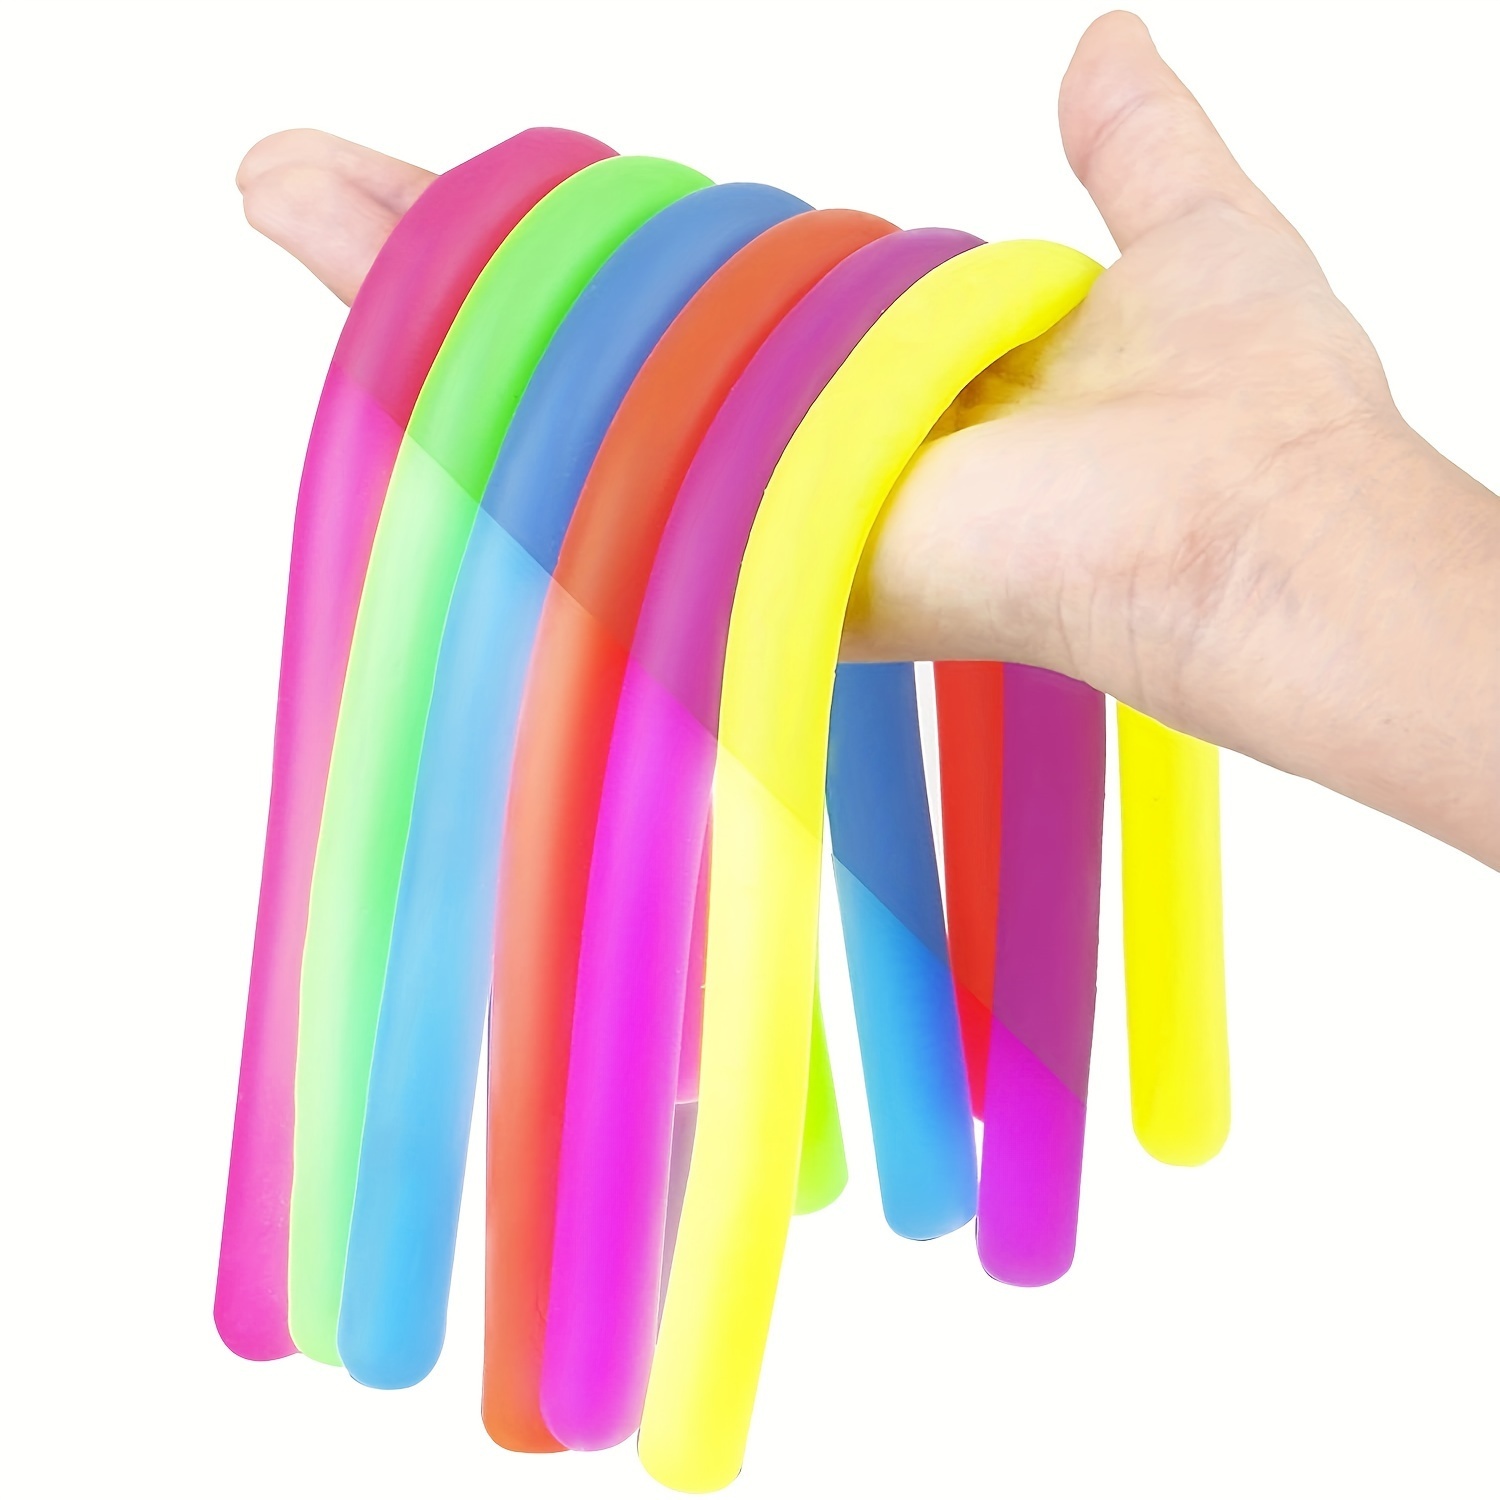 Stretchy String Fidget Toy Bracelets for Kids, 12 Pack Squeeze Noodles Toy  for Girls Boys, Stretchy Strings Anti Anxiety Sensory Toys Stress Relief